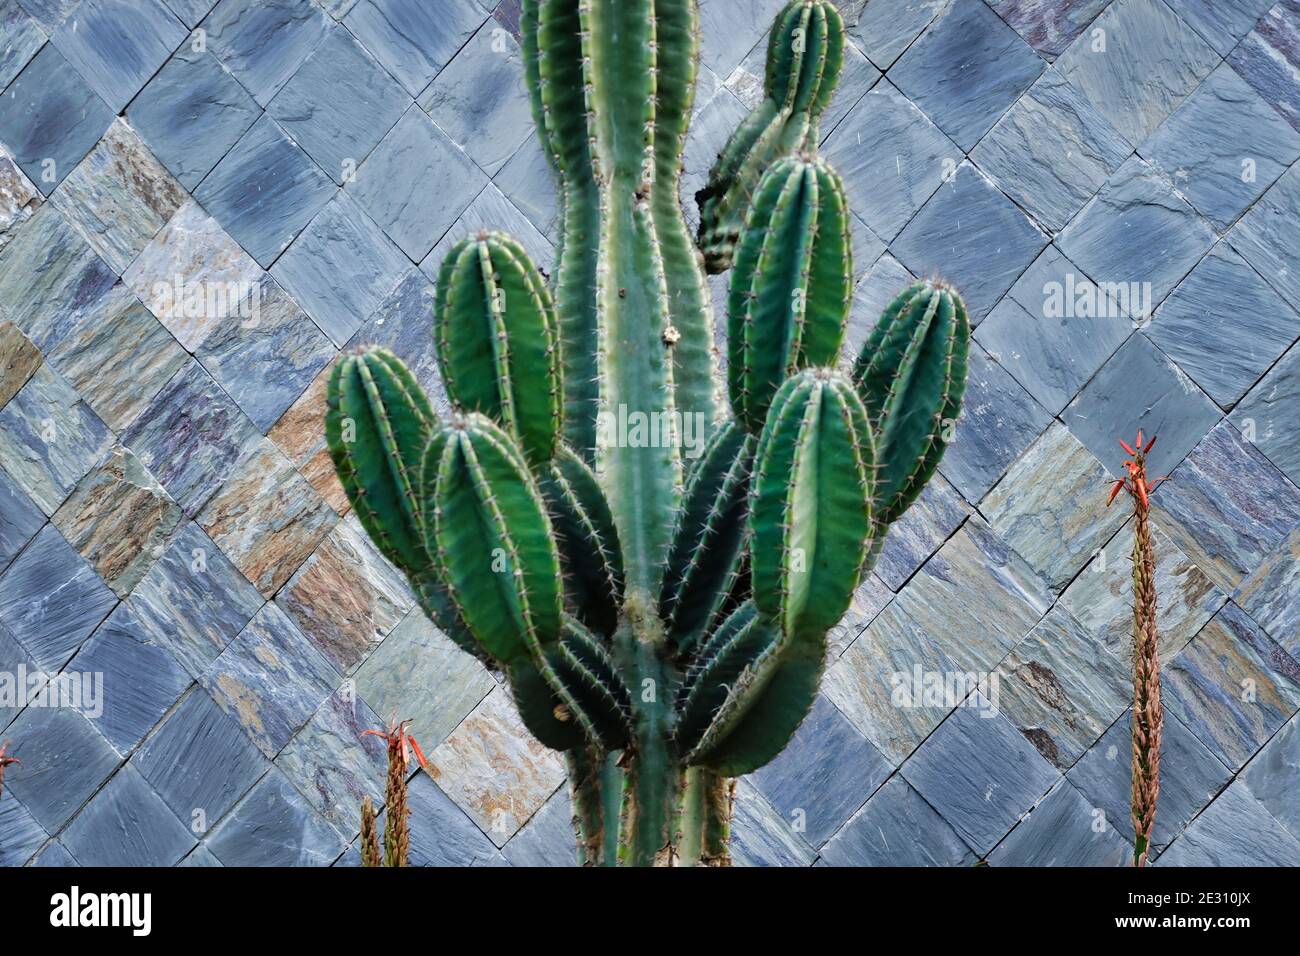 Green cactus cereus repandus on the background of tile wall texture Stock Photo